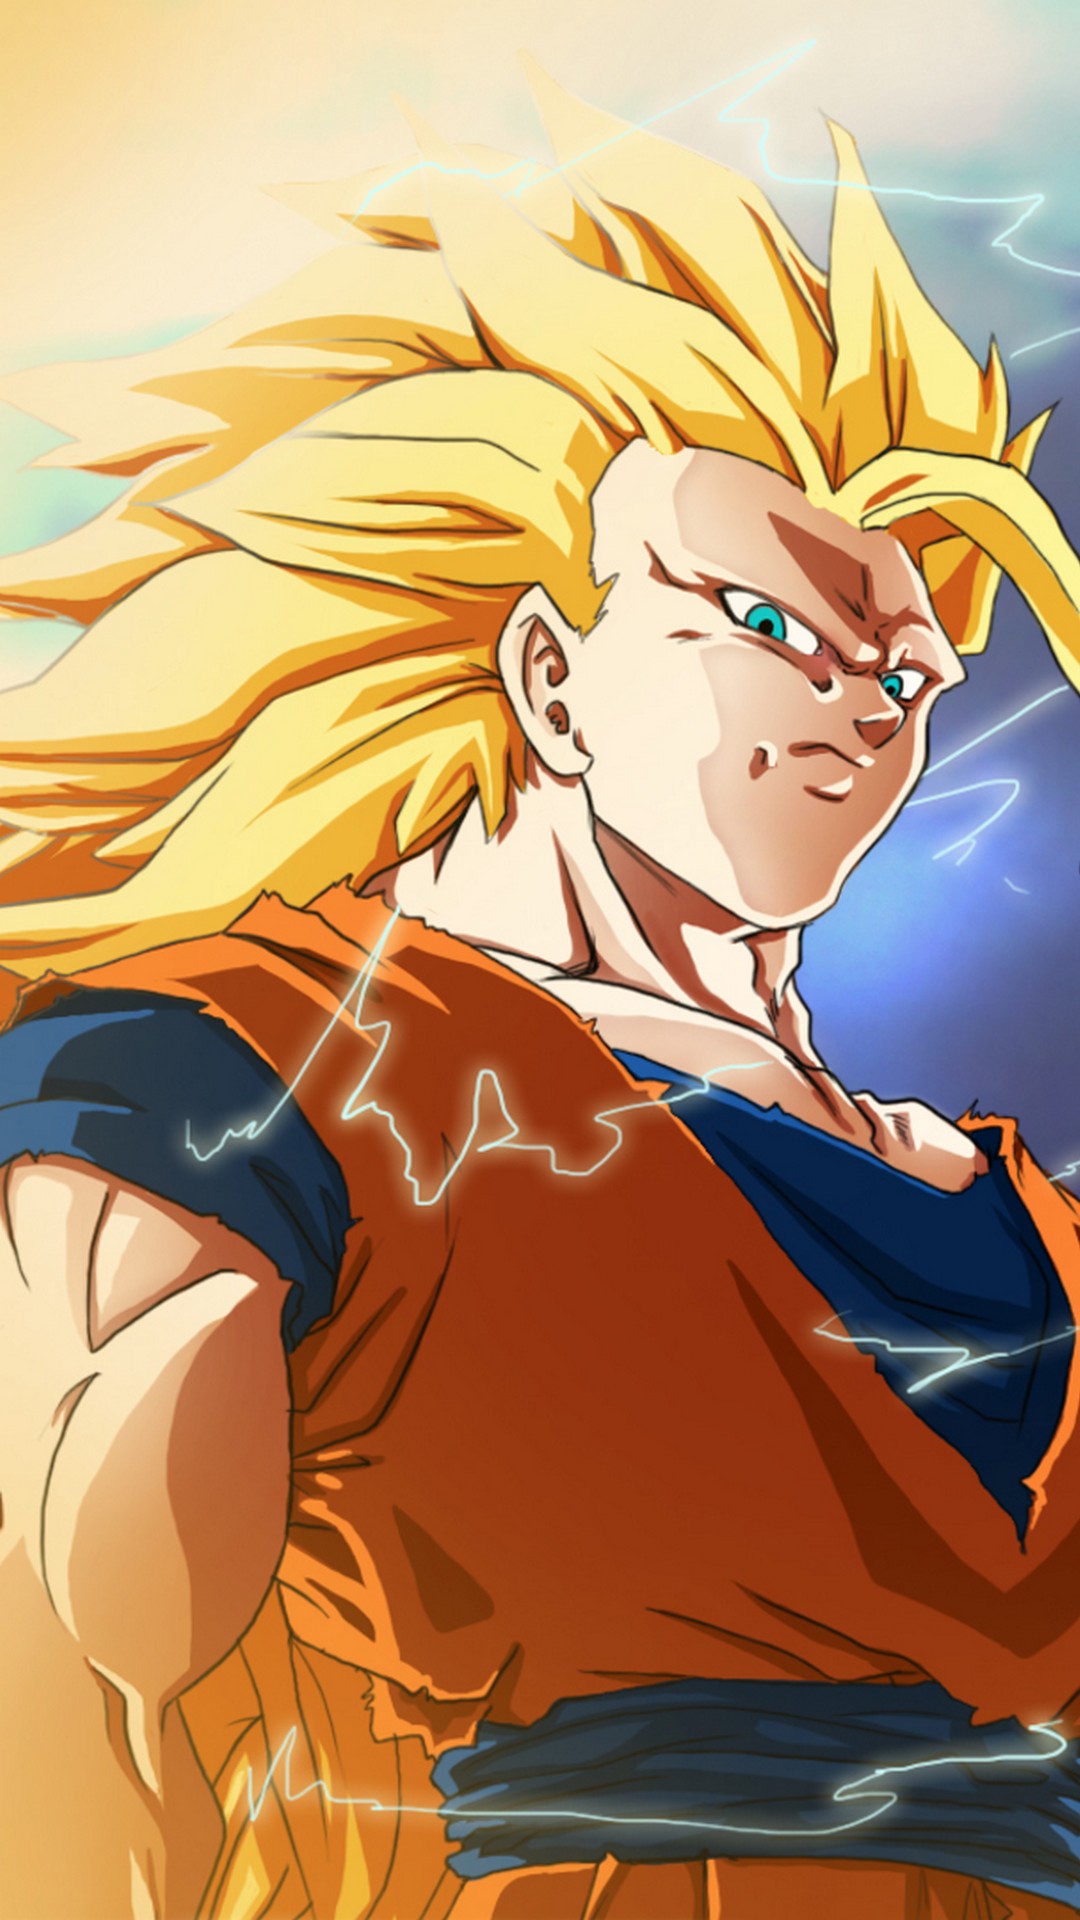 Goku SSJ3 Wallpaper iPhone with image resolution 1080x1920 pixel. You can make this wallpaper for your iPhone 5, 6, 7, 8, X backgrounds, Mobile Screensaver, or iPad Lock Screen